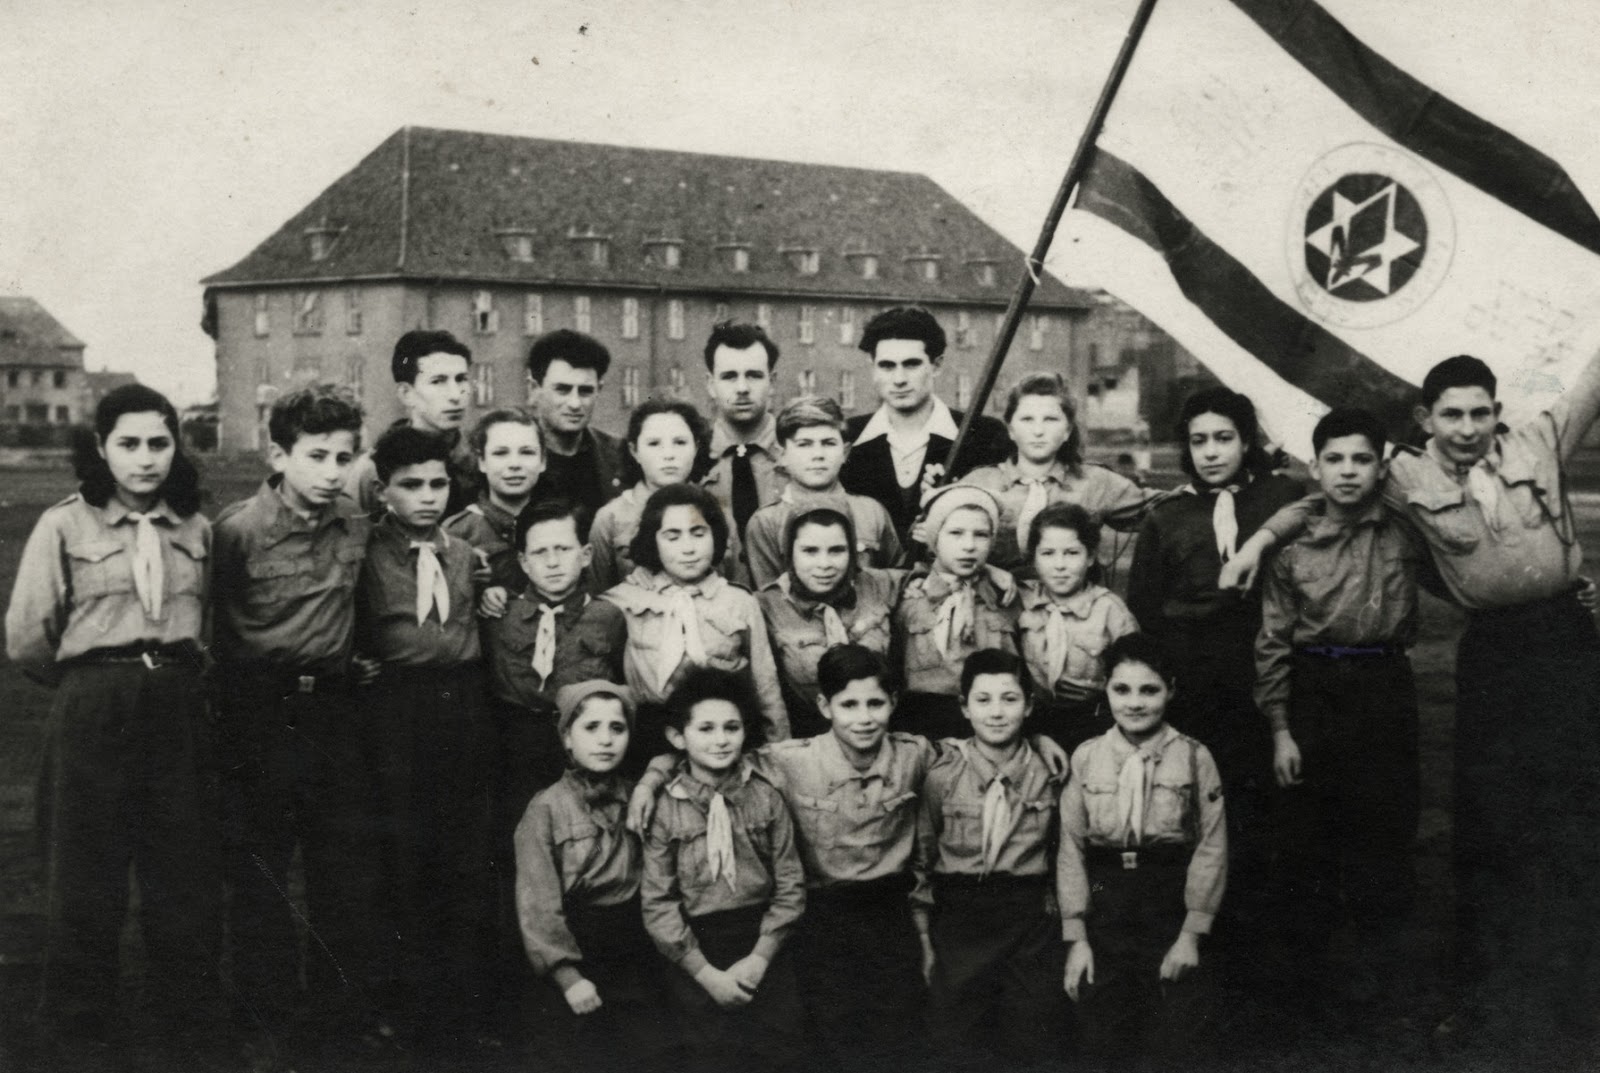 Group portrait of members of the Nitzanim group of the Zionist youth movement, Hanoar Hatzioni.

All of the children had been on the Exodus and had been sent back to Europe.  Ziomek Hammer (Shlomo HaMeiri) is pictured in the third row, fifth from the right.